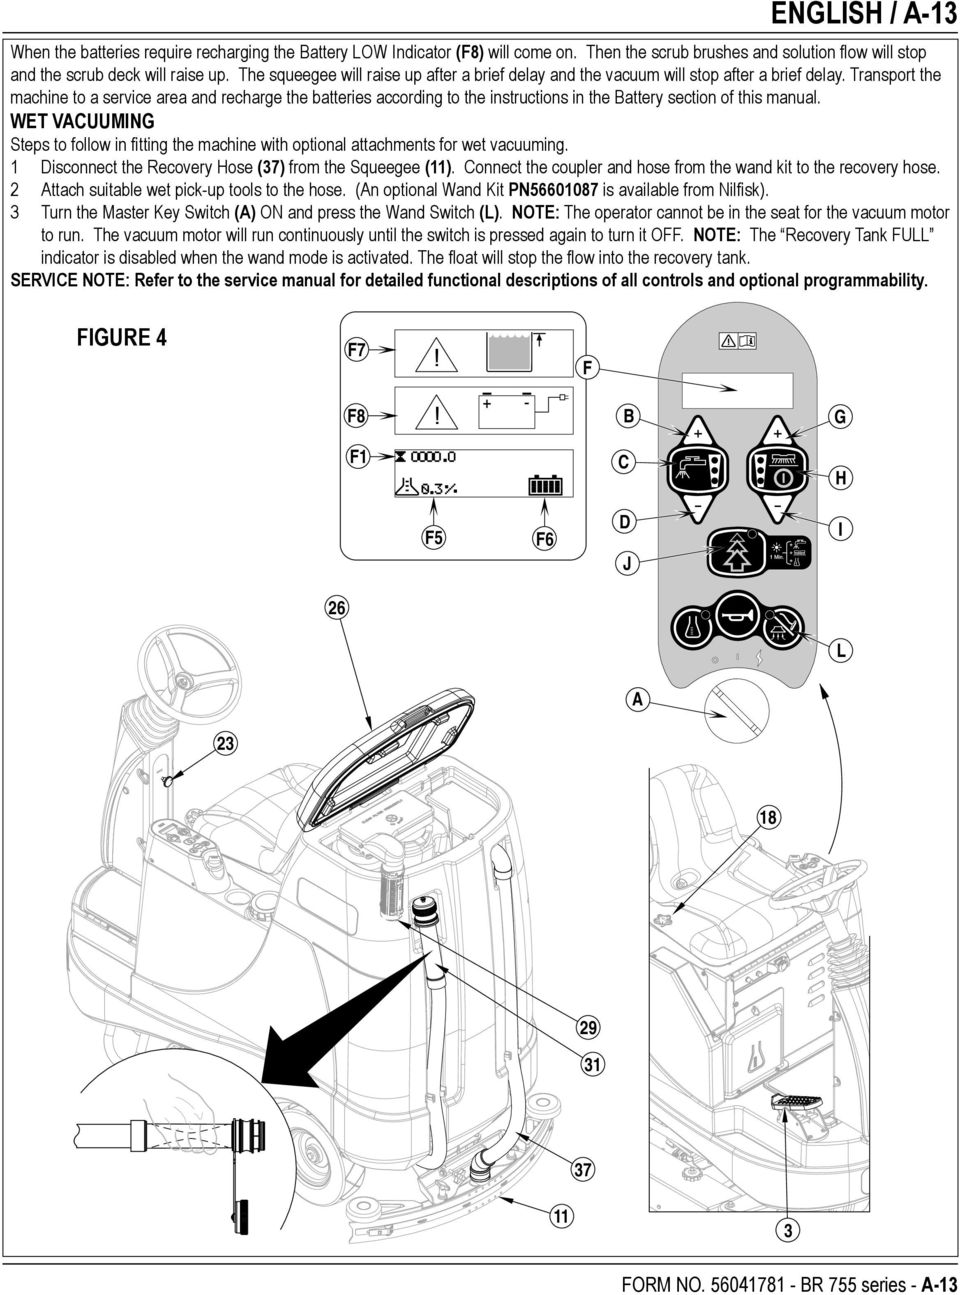 Transport the machine to a service area and recharge the batteries according to the instructions in the Battery section of this manual.